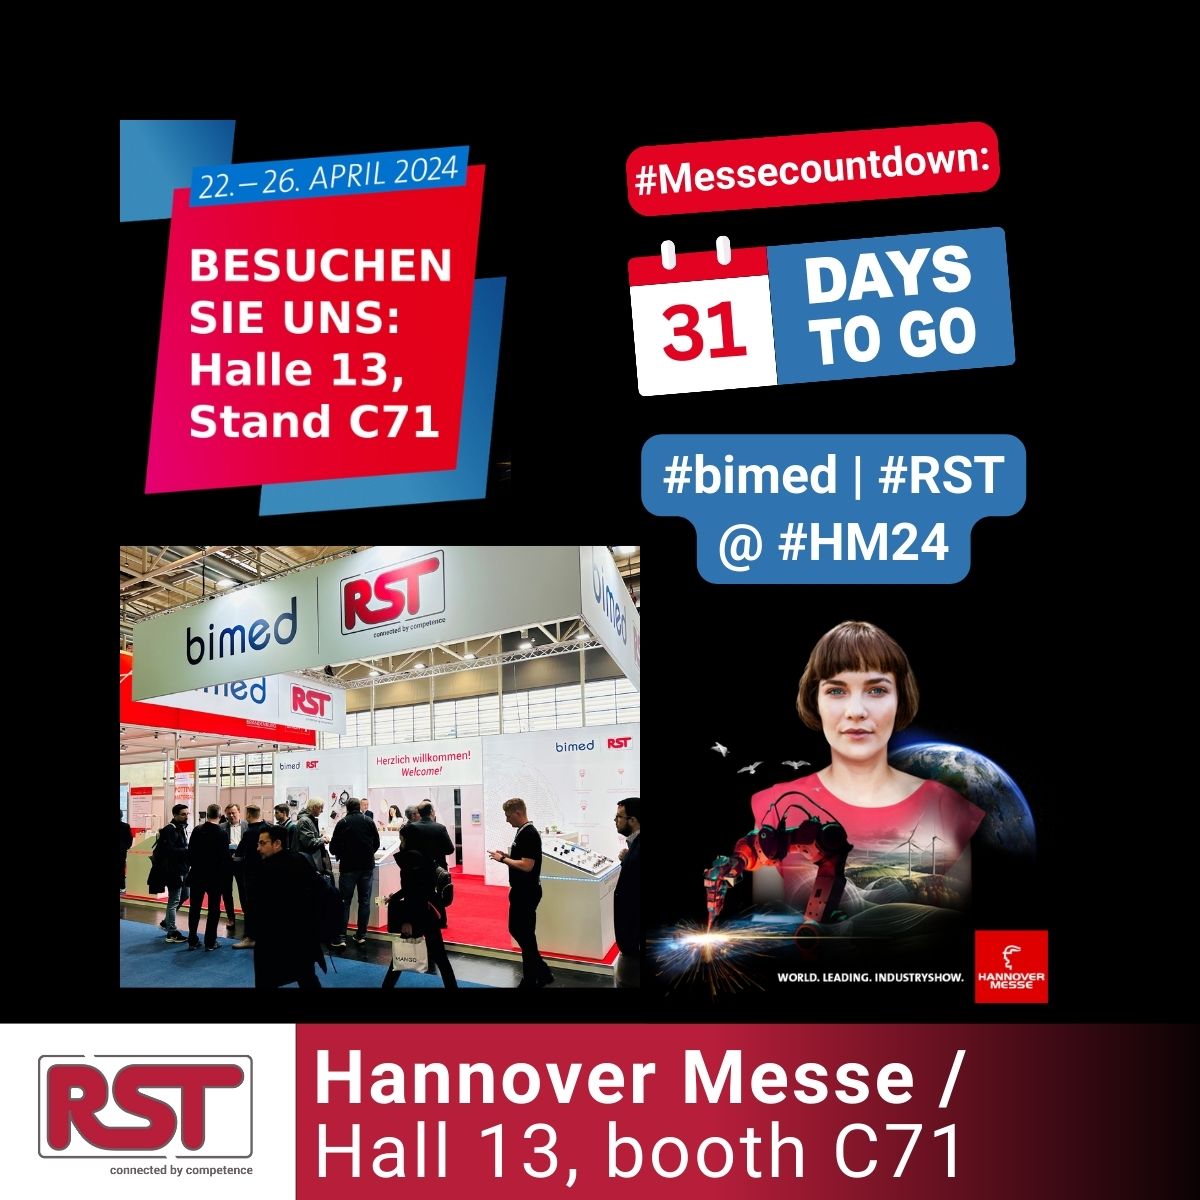 Wir sind wieder dabei: 
Besucht #RST & #Bimed auf der @hannover_messe vom 22.-26. April 2024 in #Halle13 „Energy Solutions“ an #StandC71: ow.ly/J4RW50QS8k8

#energymanagement #energysolutions #industrialtransformation #hannovermesse #HM24

RST – connected by competence